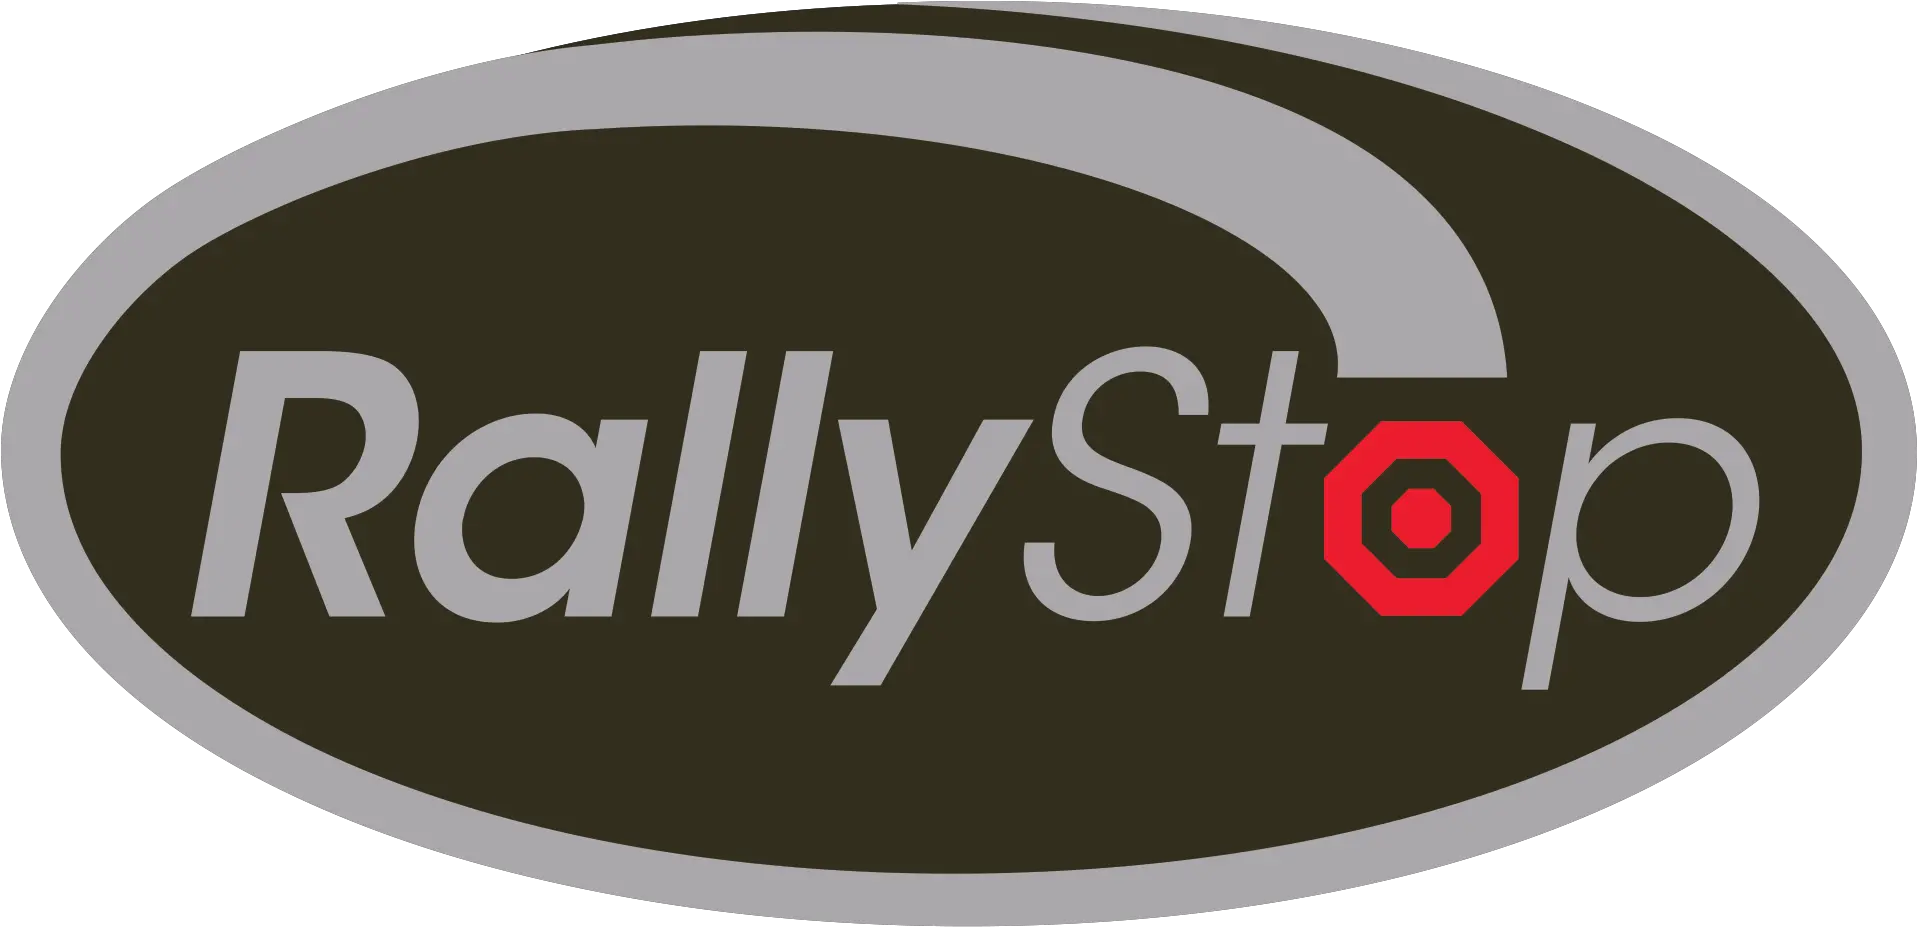 Rallystop Gas Stations U0026 Convenience Stores Rallystop Gas Circle Png Shell Gas Logo